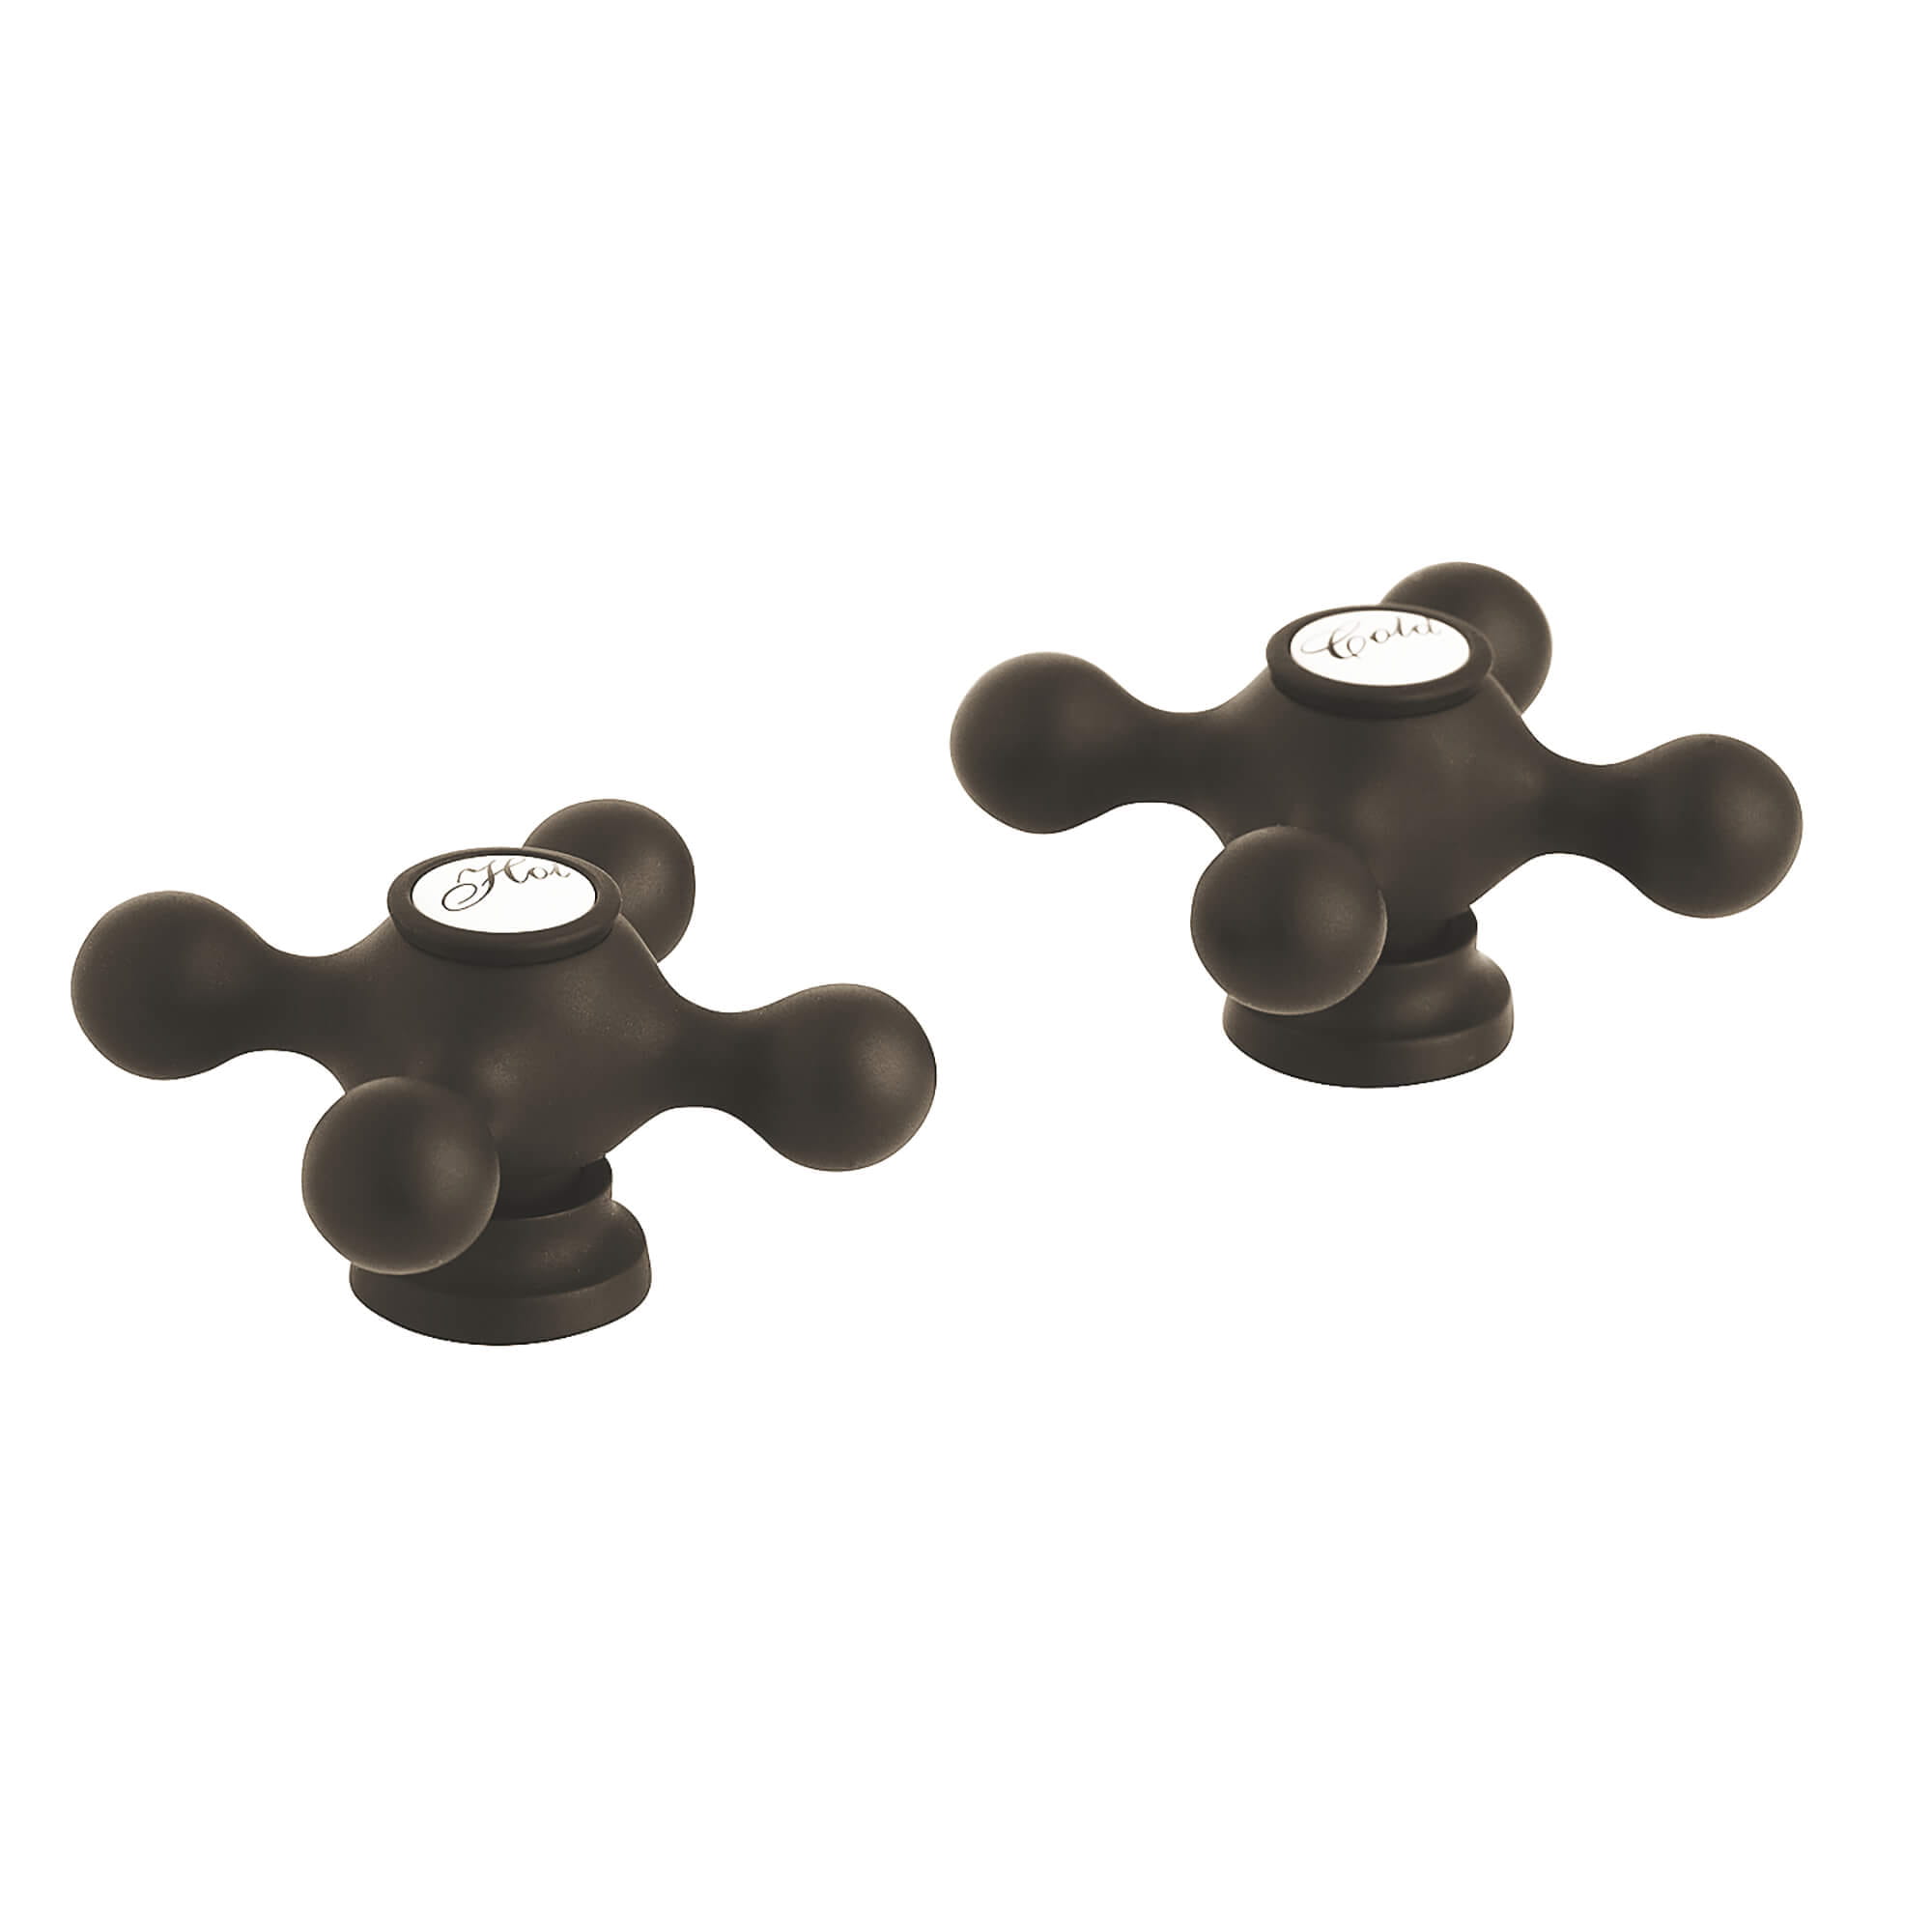 Cross Handles Pair GROHE OIL RUBBED BRONZE